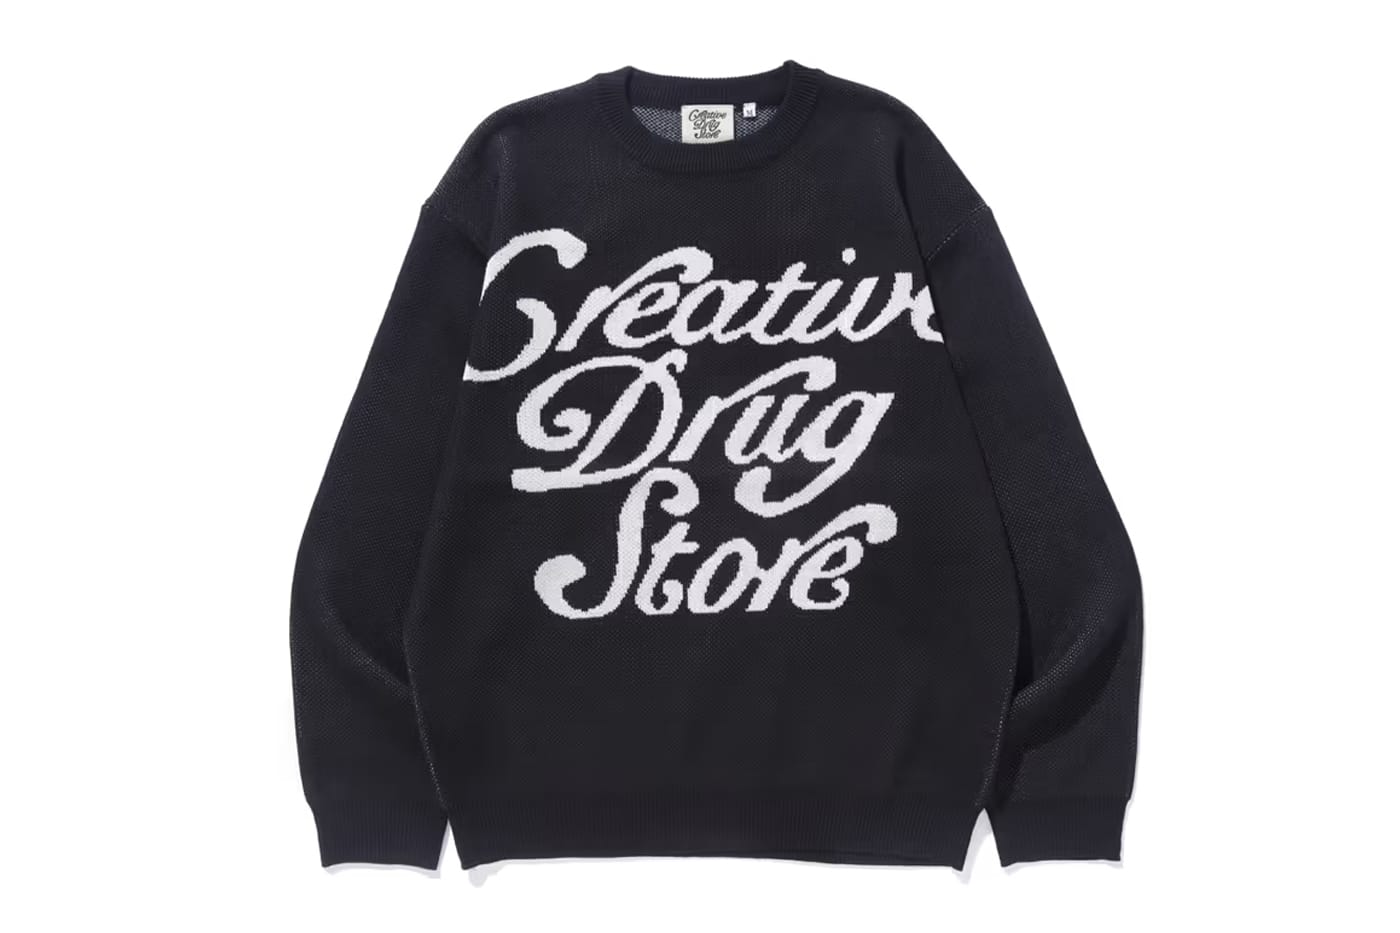 CreativeDrugStore Taps Verdy for 